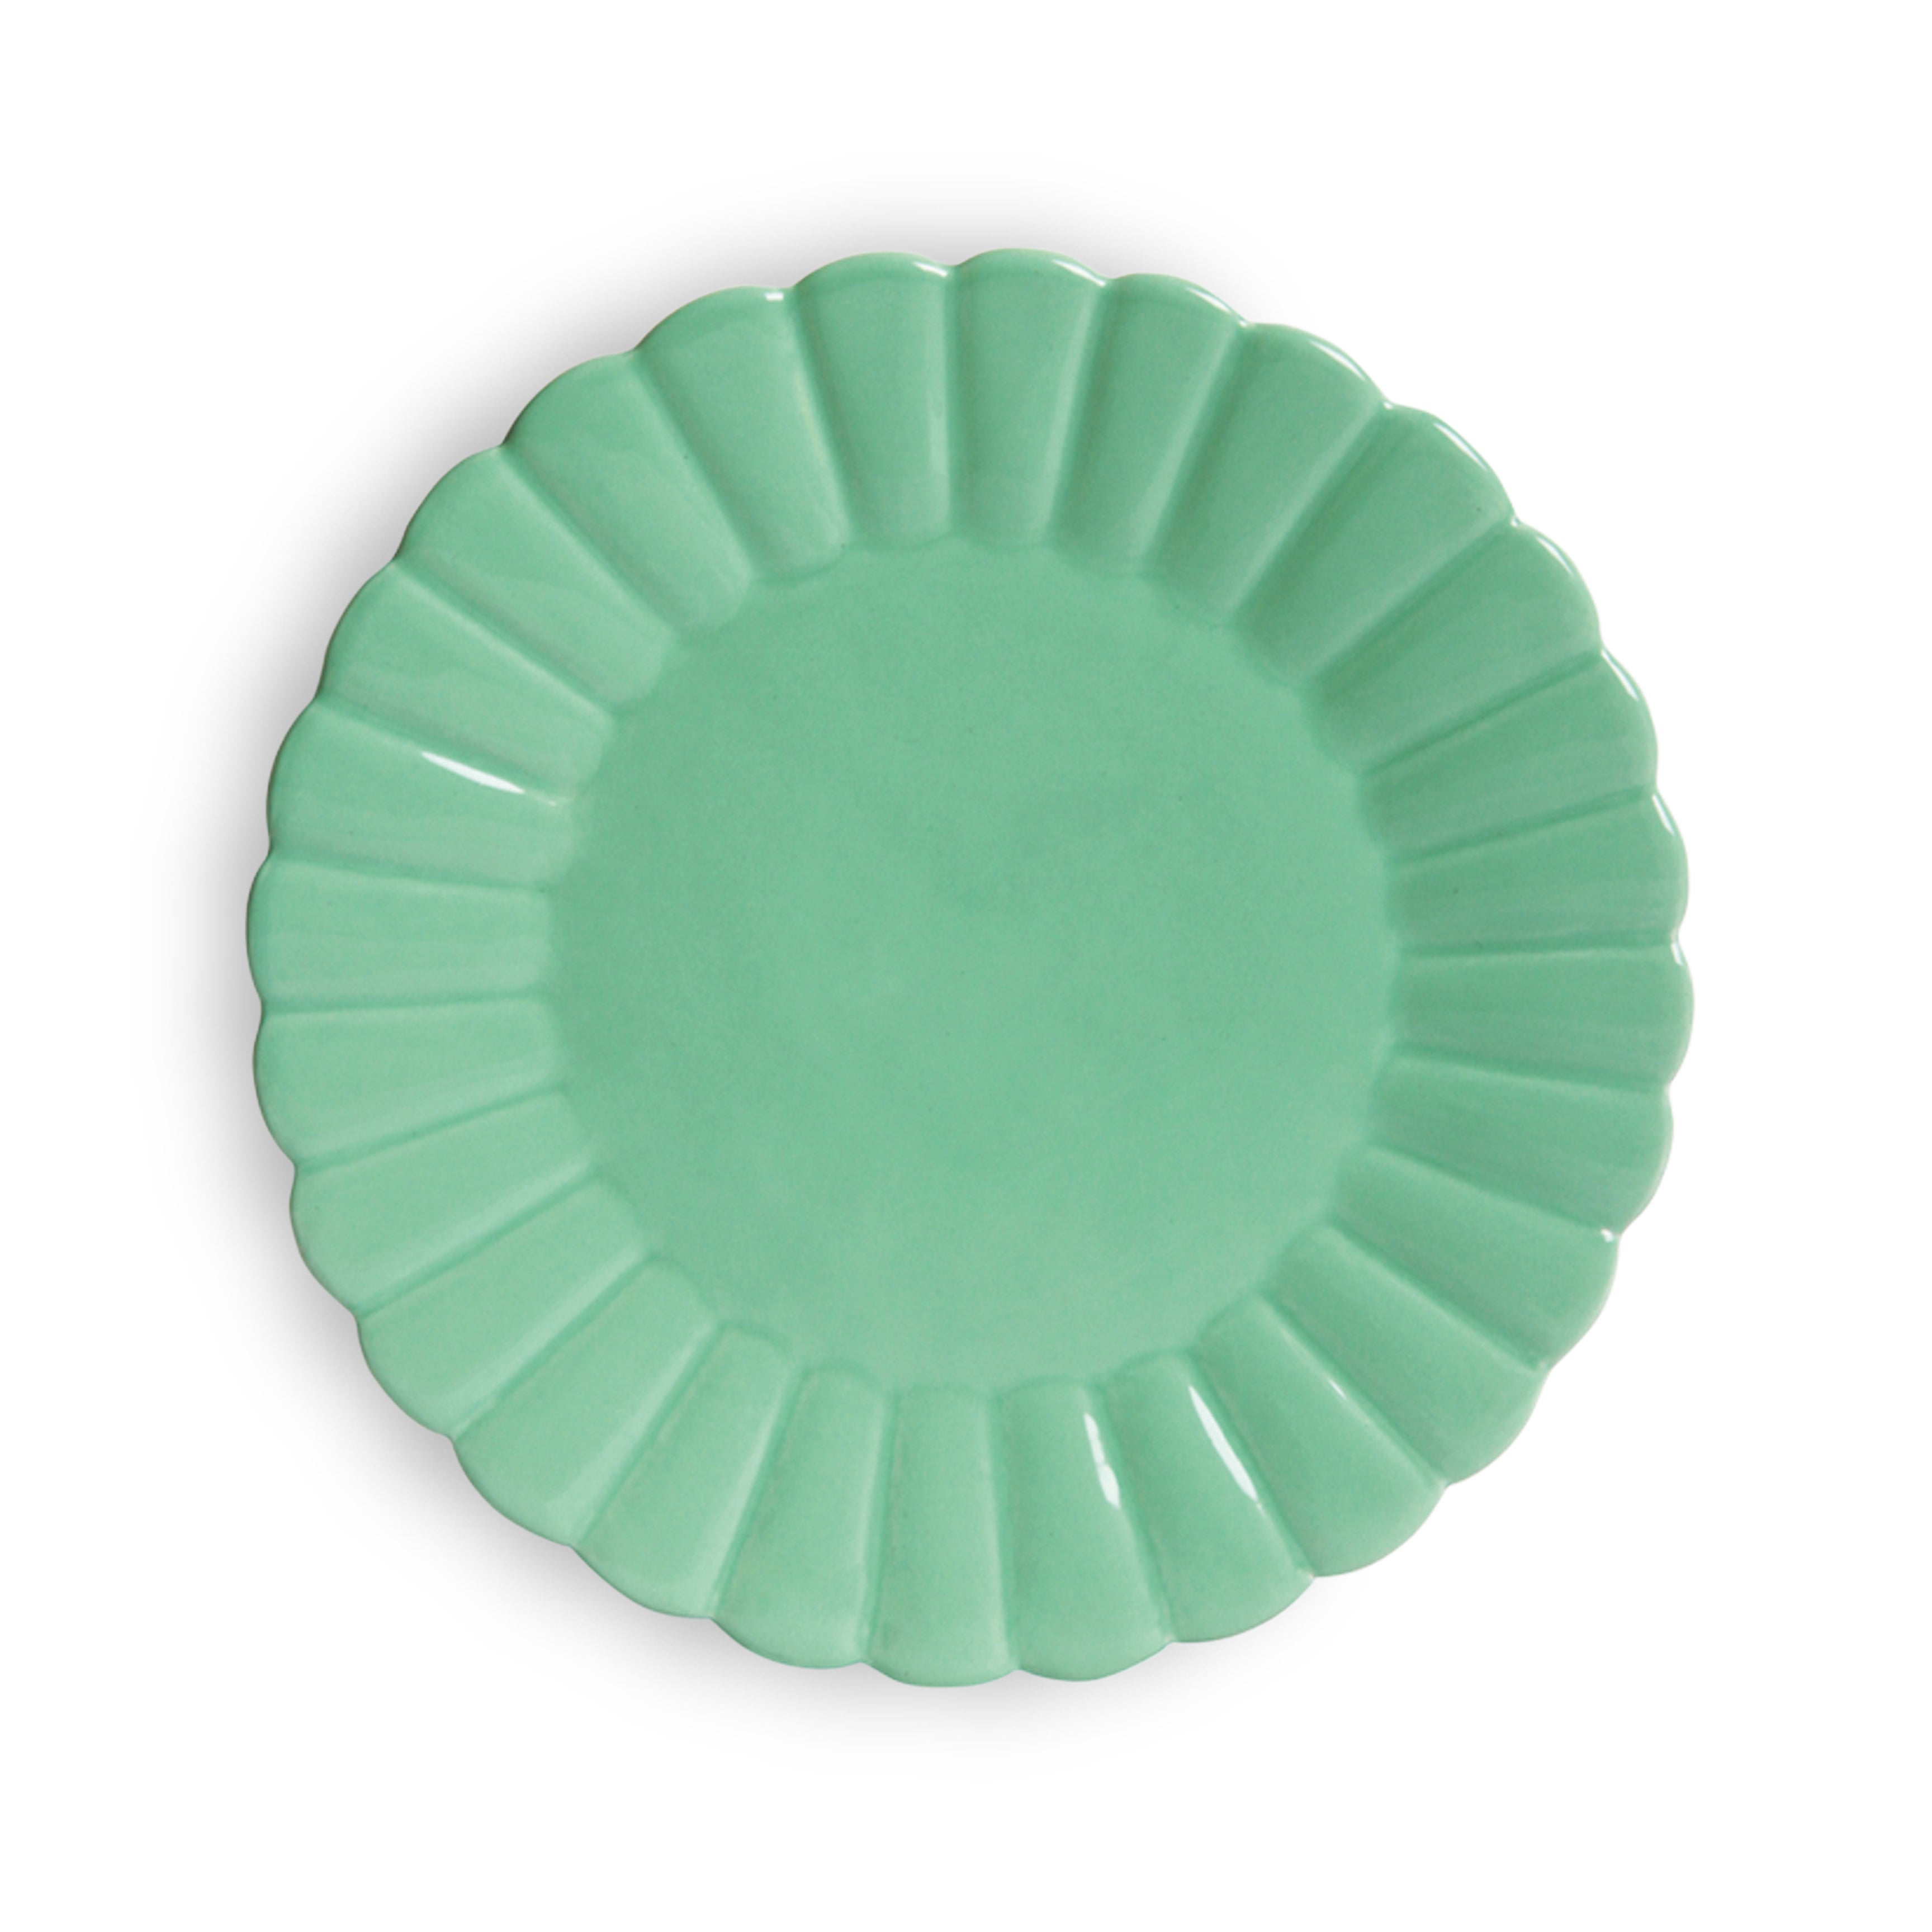 Scallop Plate | 6 Colours available